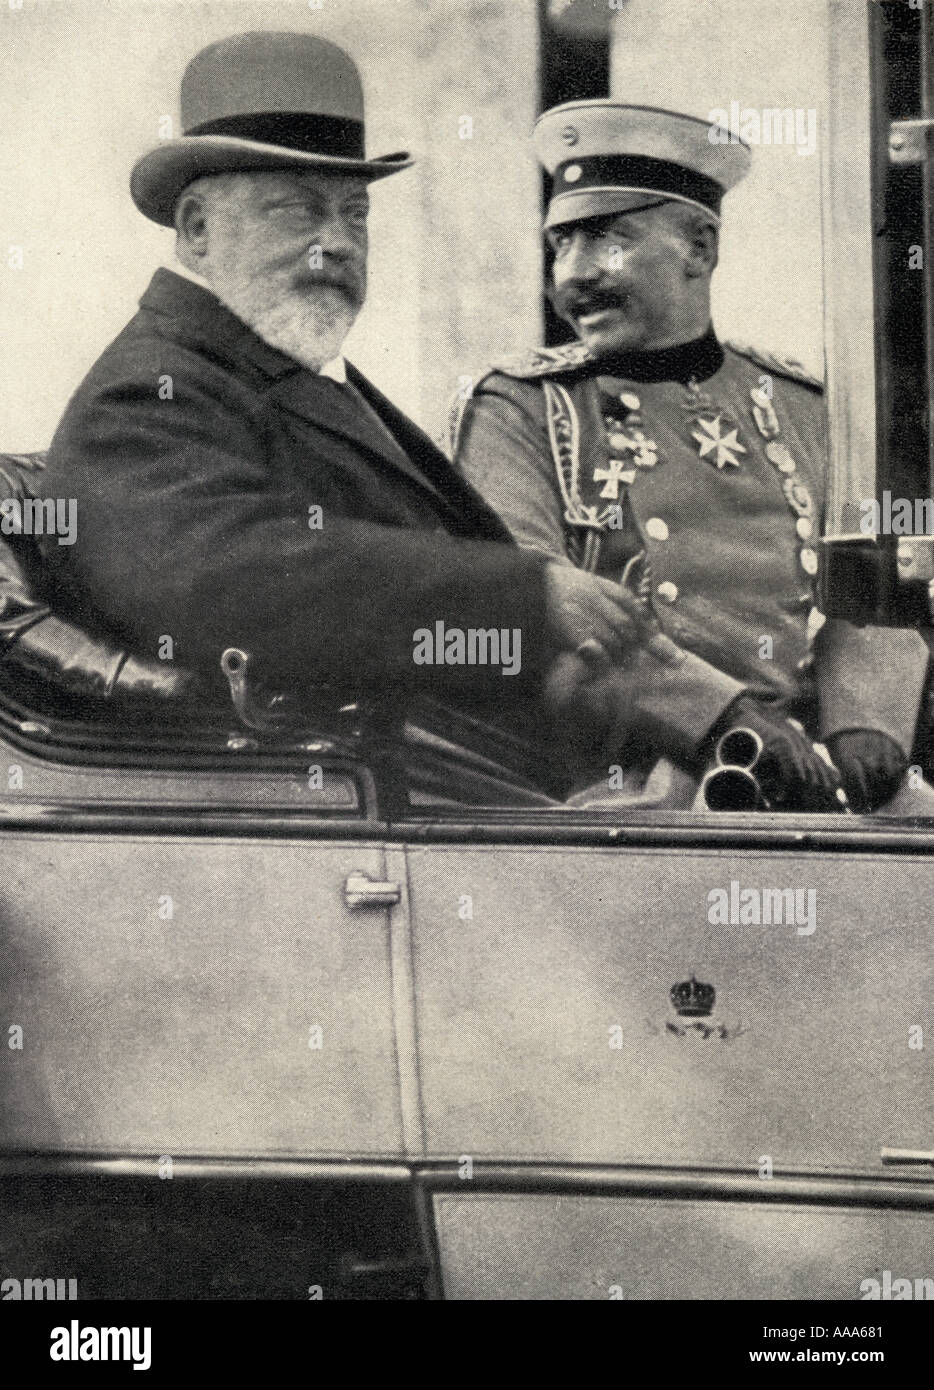 Kaiser Wilhelm II,1859 -1941. Emperor of Germany and King of Prussia, 1888 - 1918, and Edward VII, 1841 - 1910. King of England, 1901 - 1910. Stock Photo